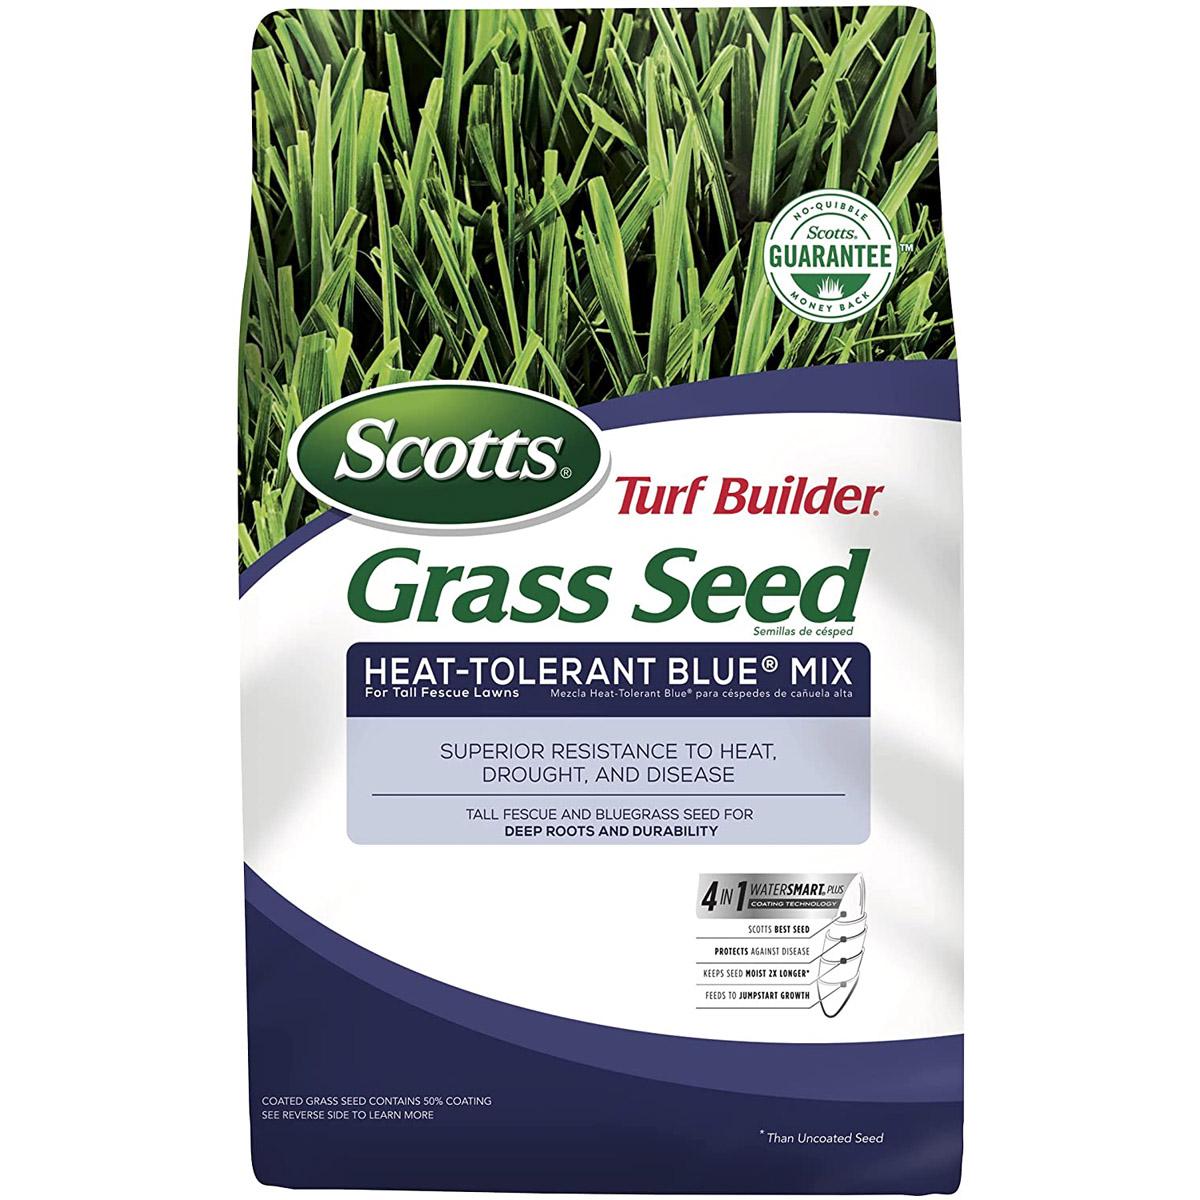 Scotts Turf Builder Grass Seed Heat-Tolerant Blue Mix for $27.56 Shipped